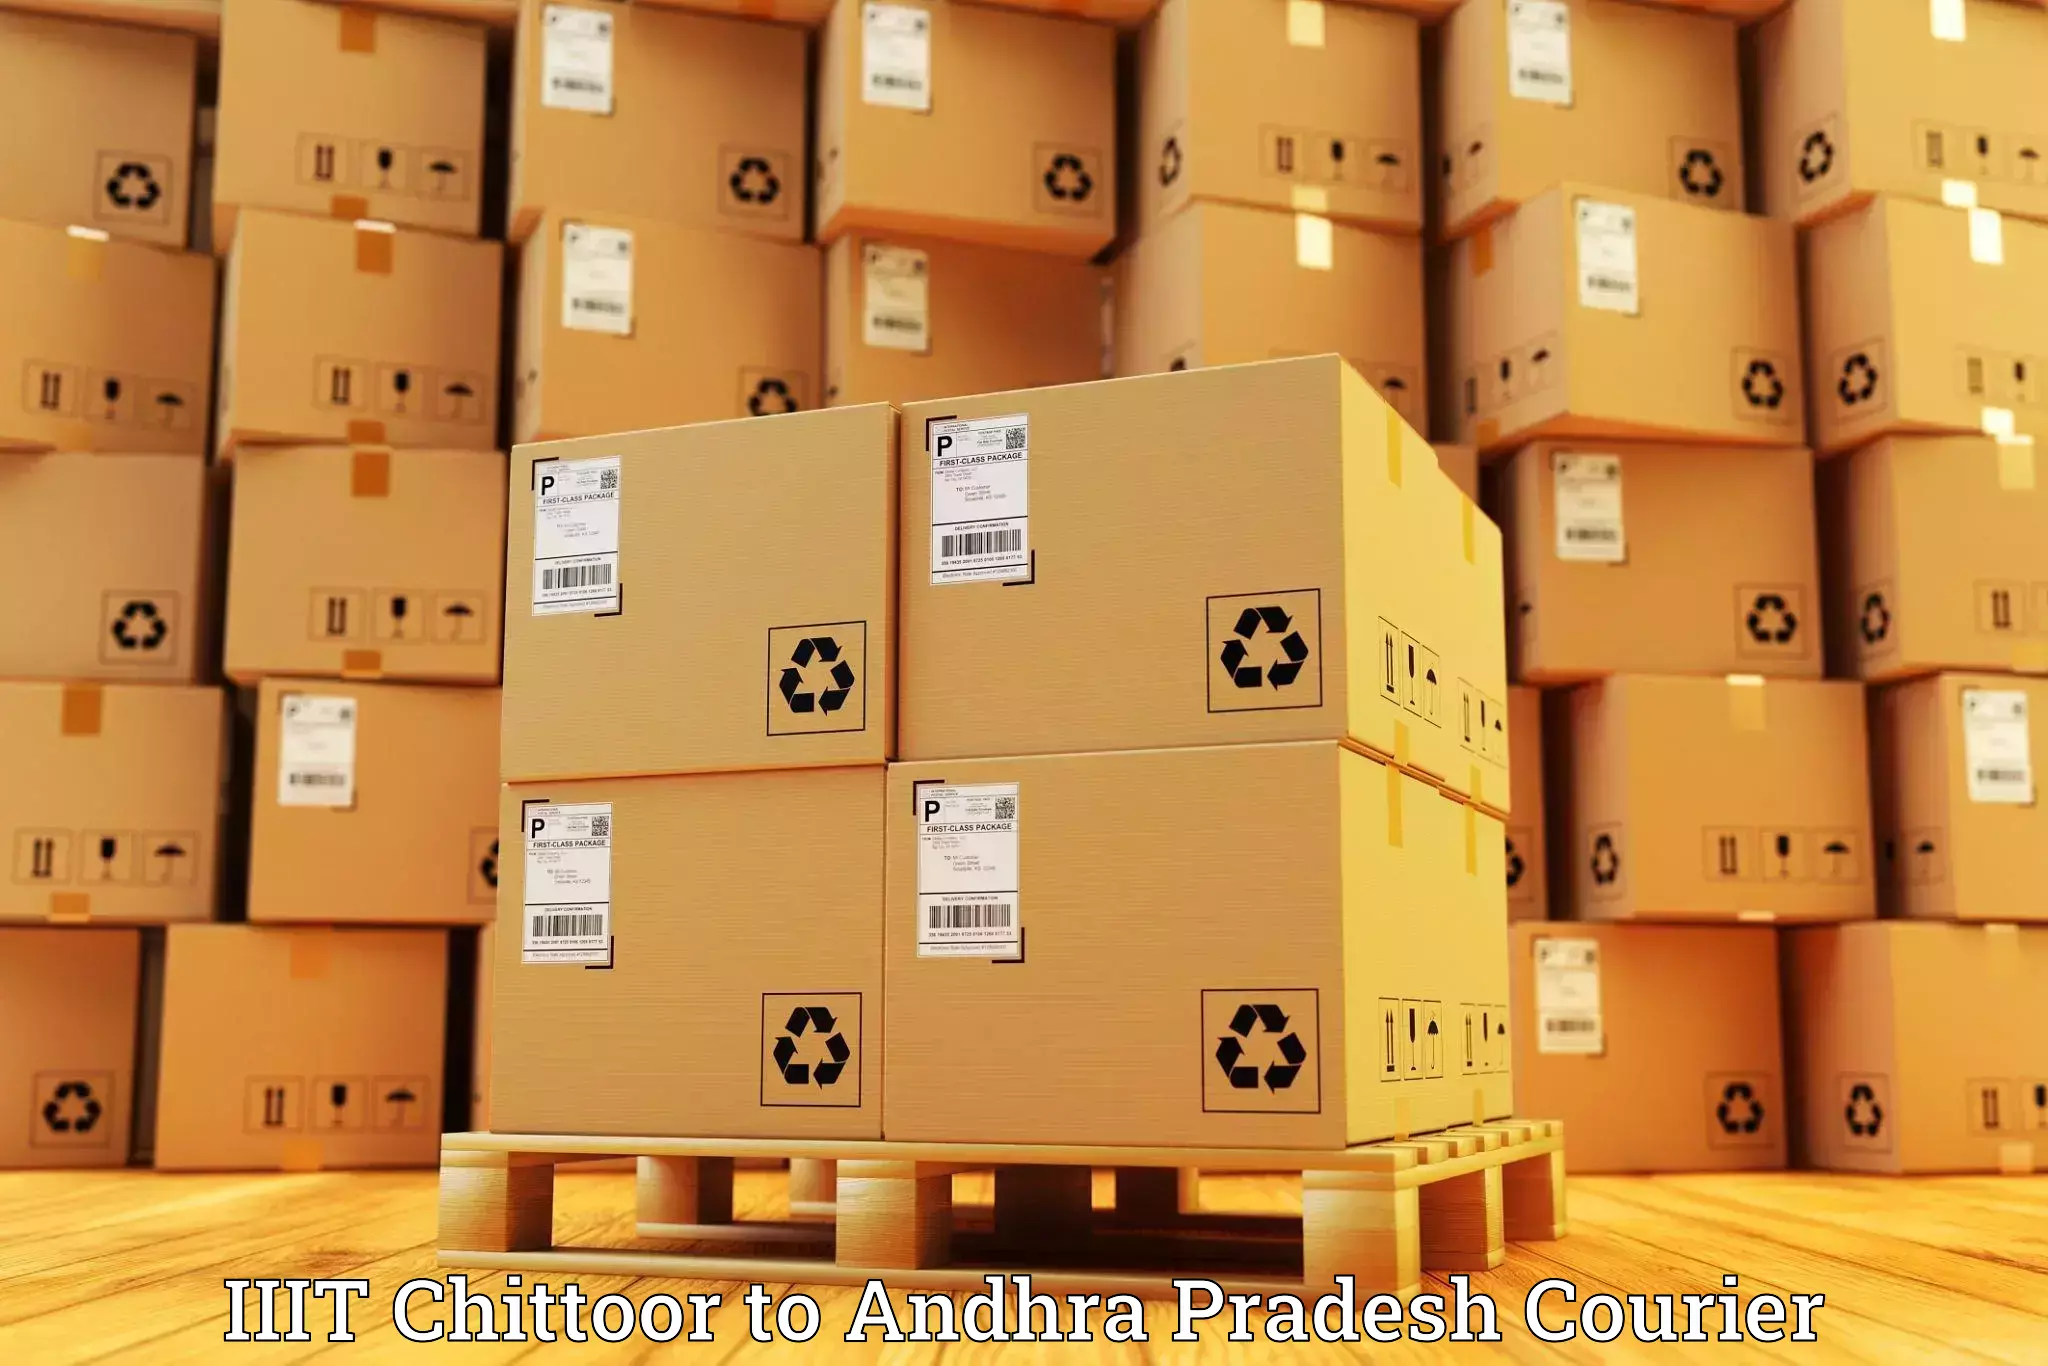 State-of-the-art courier technology IIIT Chittoor to Kakinada